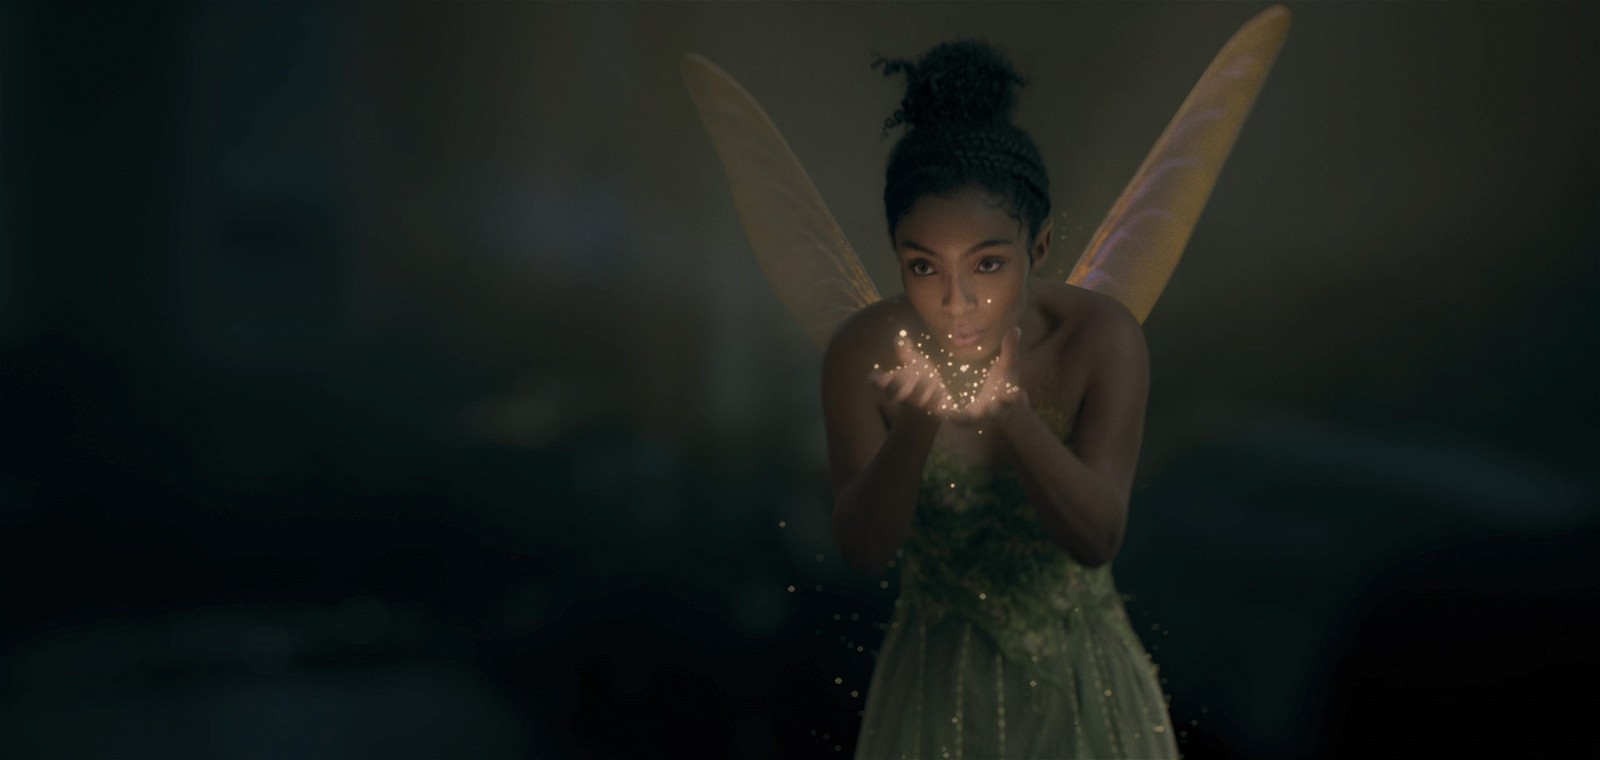 Yara Shahidi as Tinkerbell in Disney's live-action PETER PAN &amp; WENDY, exclusively on Disney+. Photo courtesy of Disney. © 2023 Disney Enterprises, Inc. All Rights Reserved.